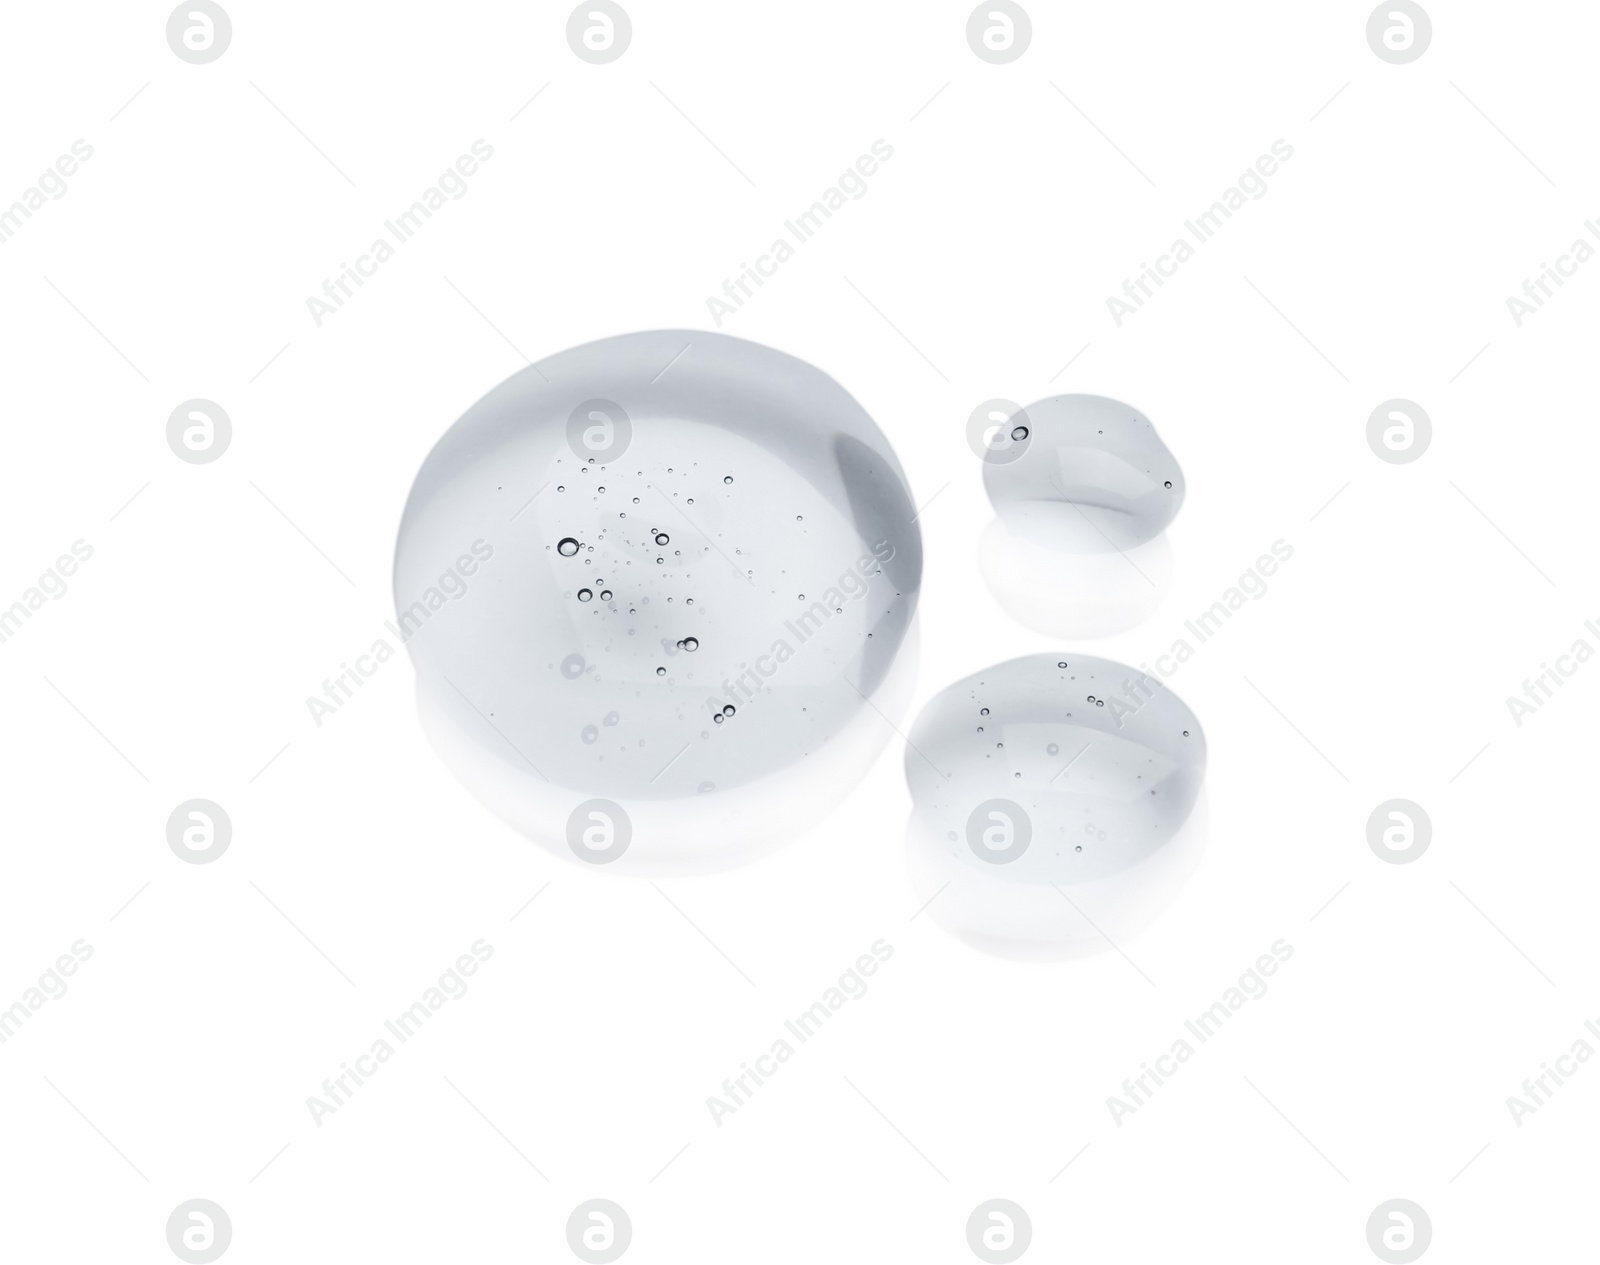 Photo of Drops of cosmetic oil on reflective surface, above view